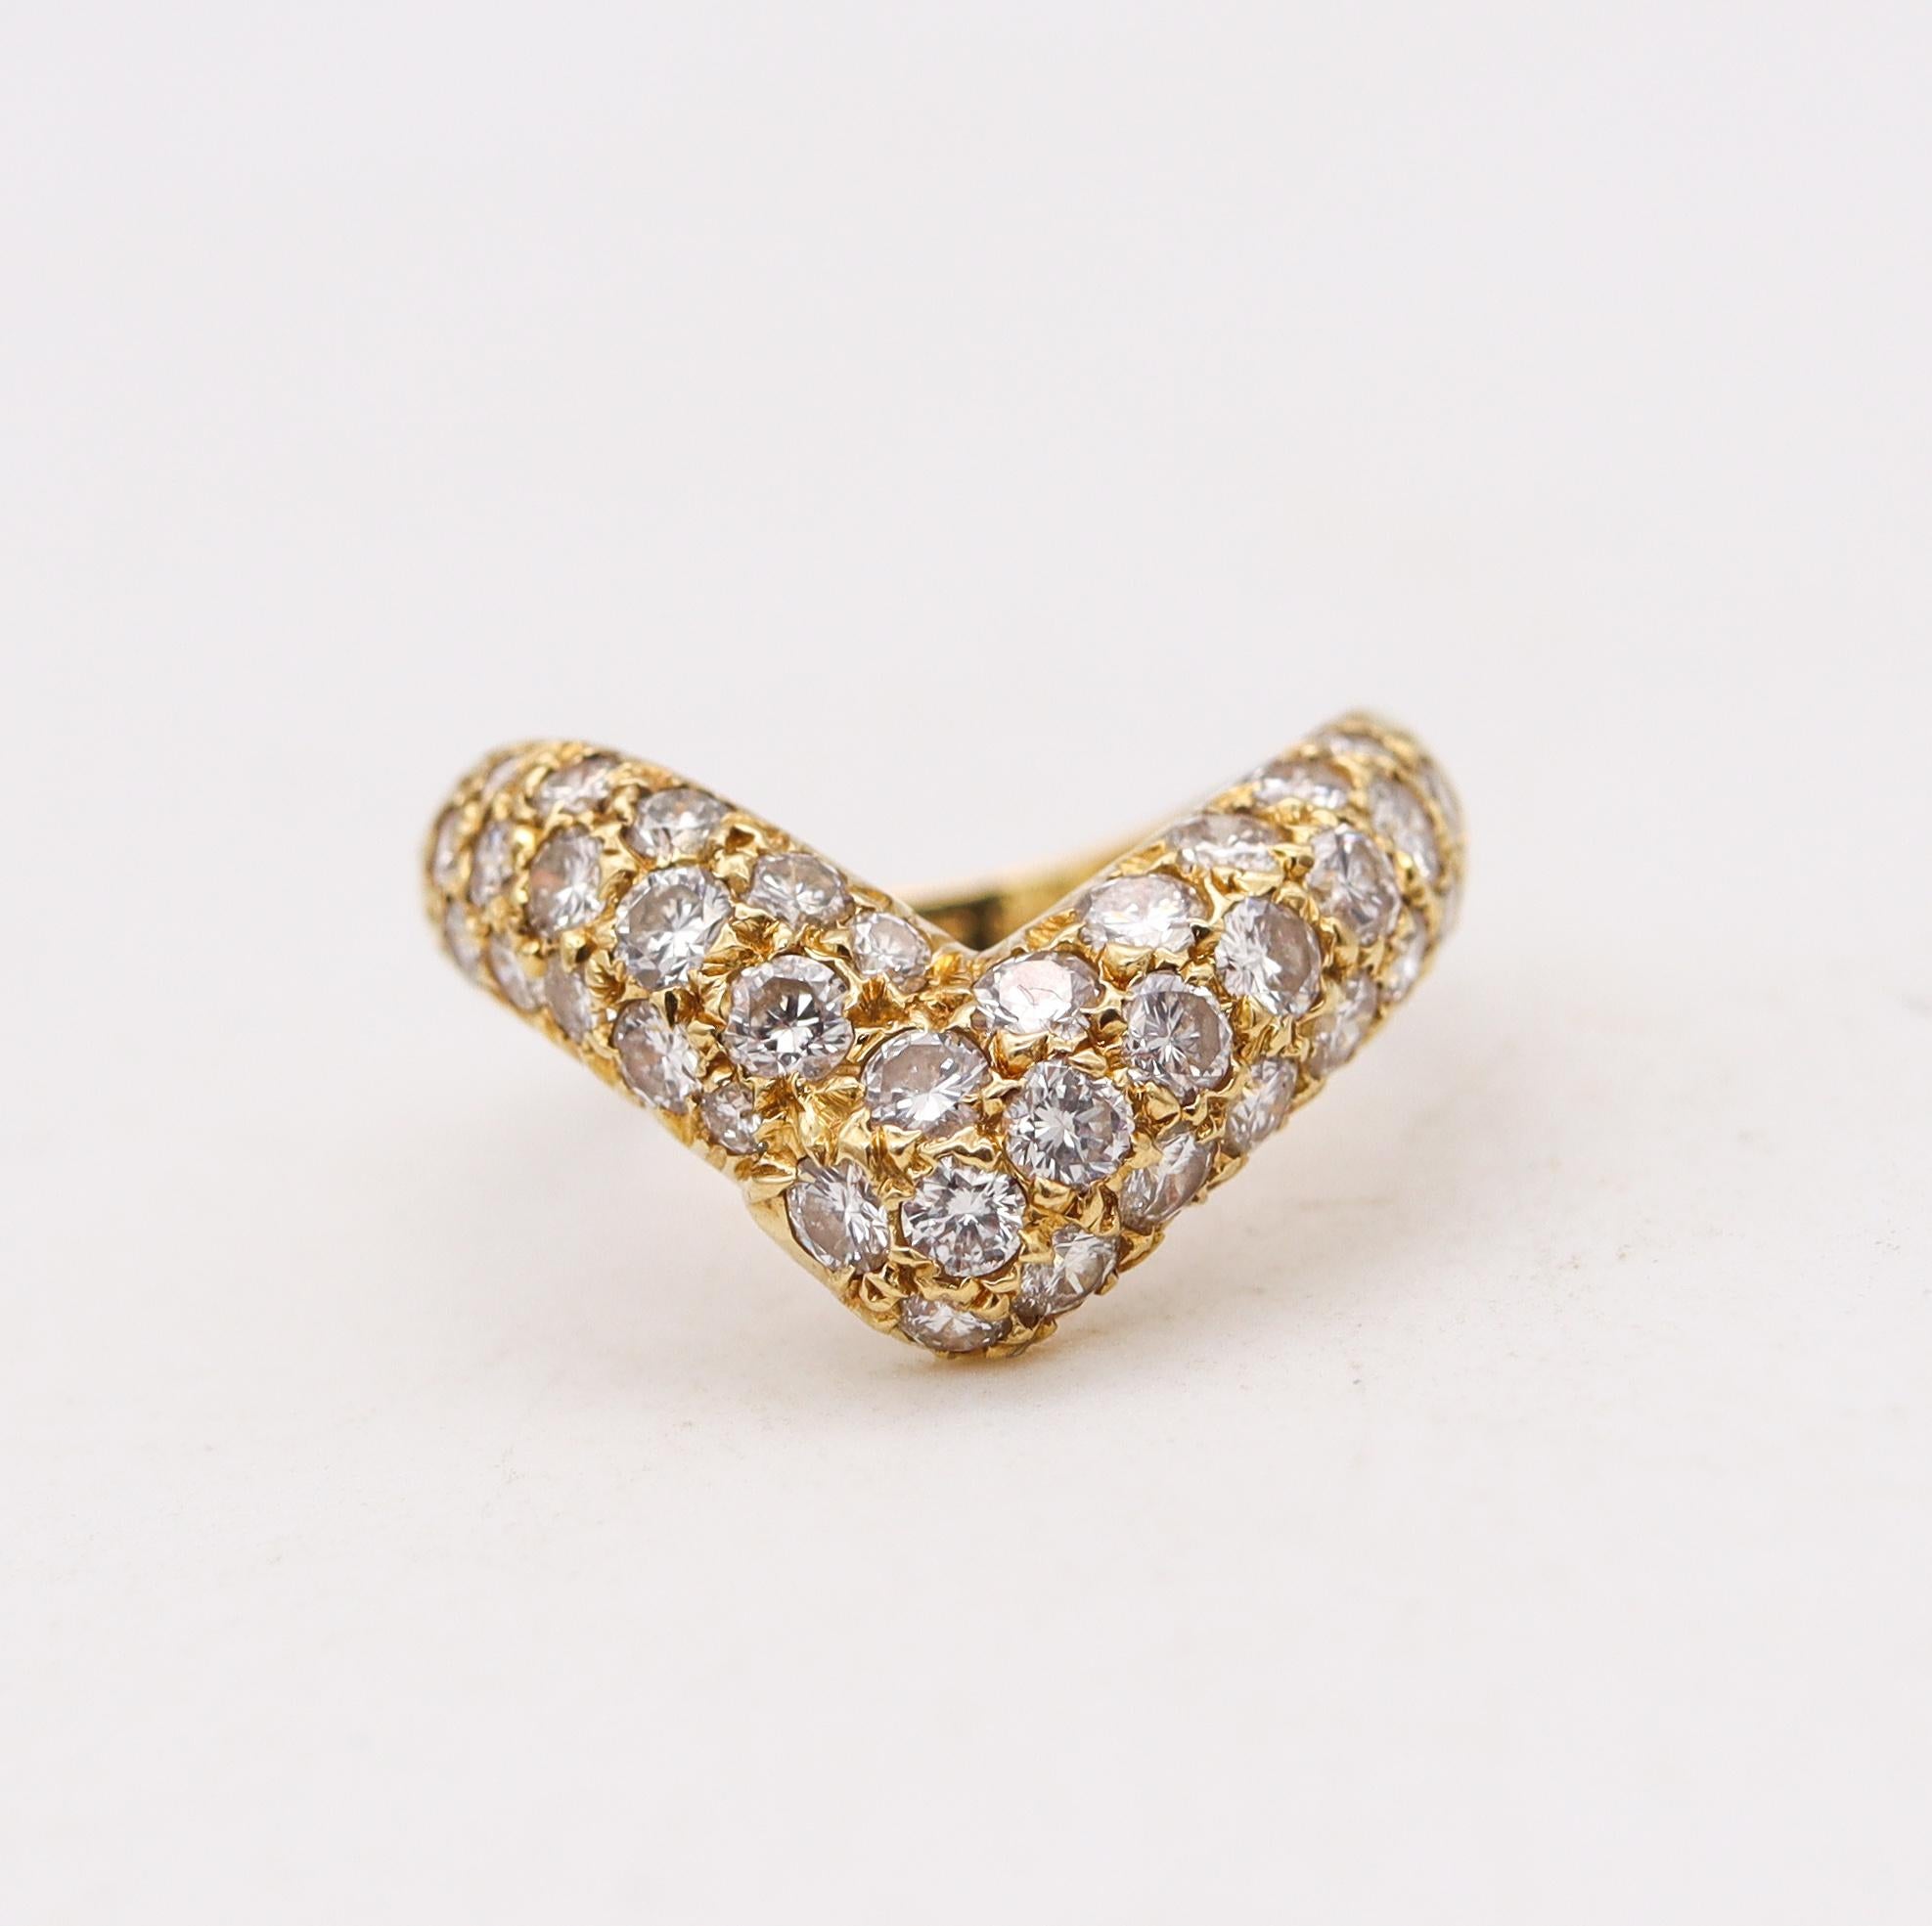 Women's or Men's Van Cleef & Arpels 1976 Paris v Ring in 18kt Gold with 1.08 Cts in Pave Diamonds